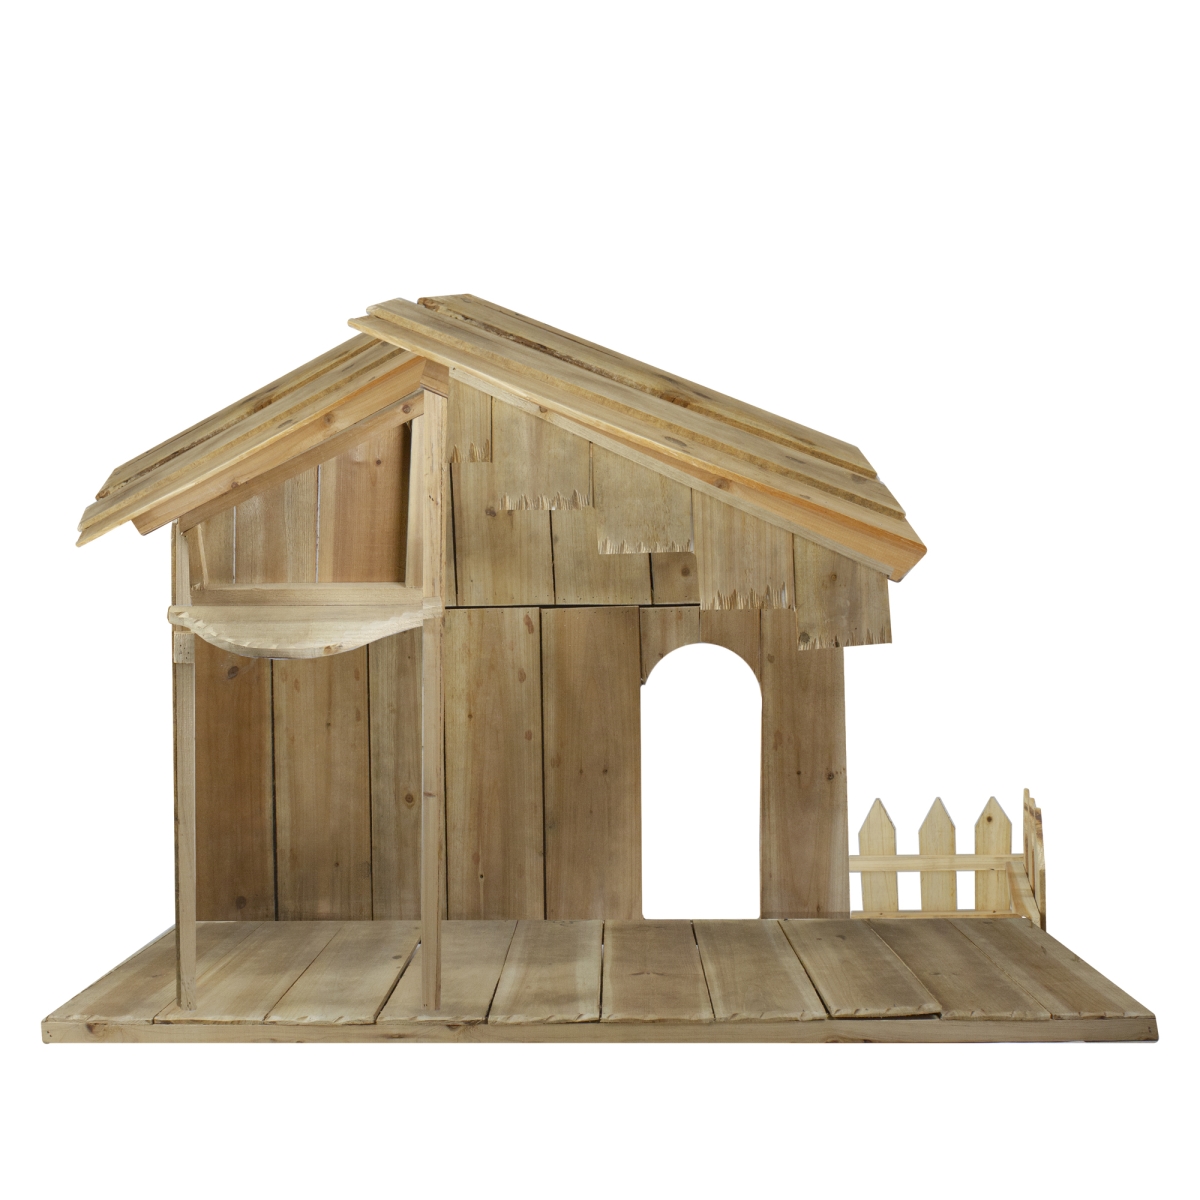 LB International 33681586 51 in. Christmas Nativity Wood Stable